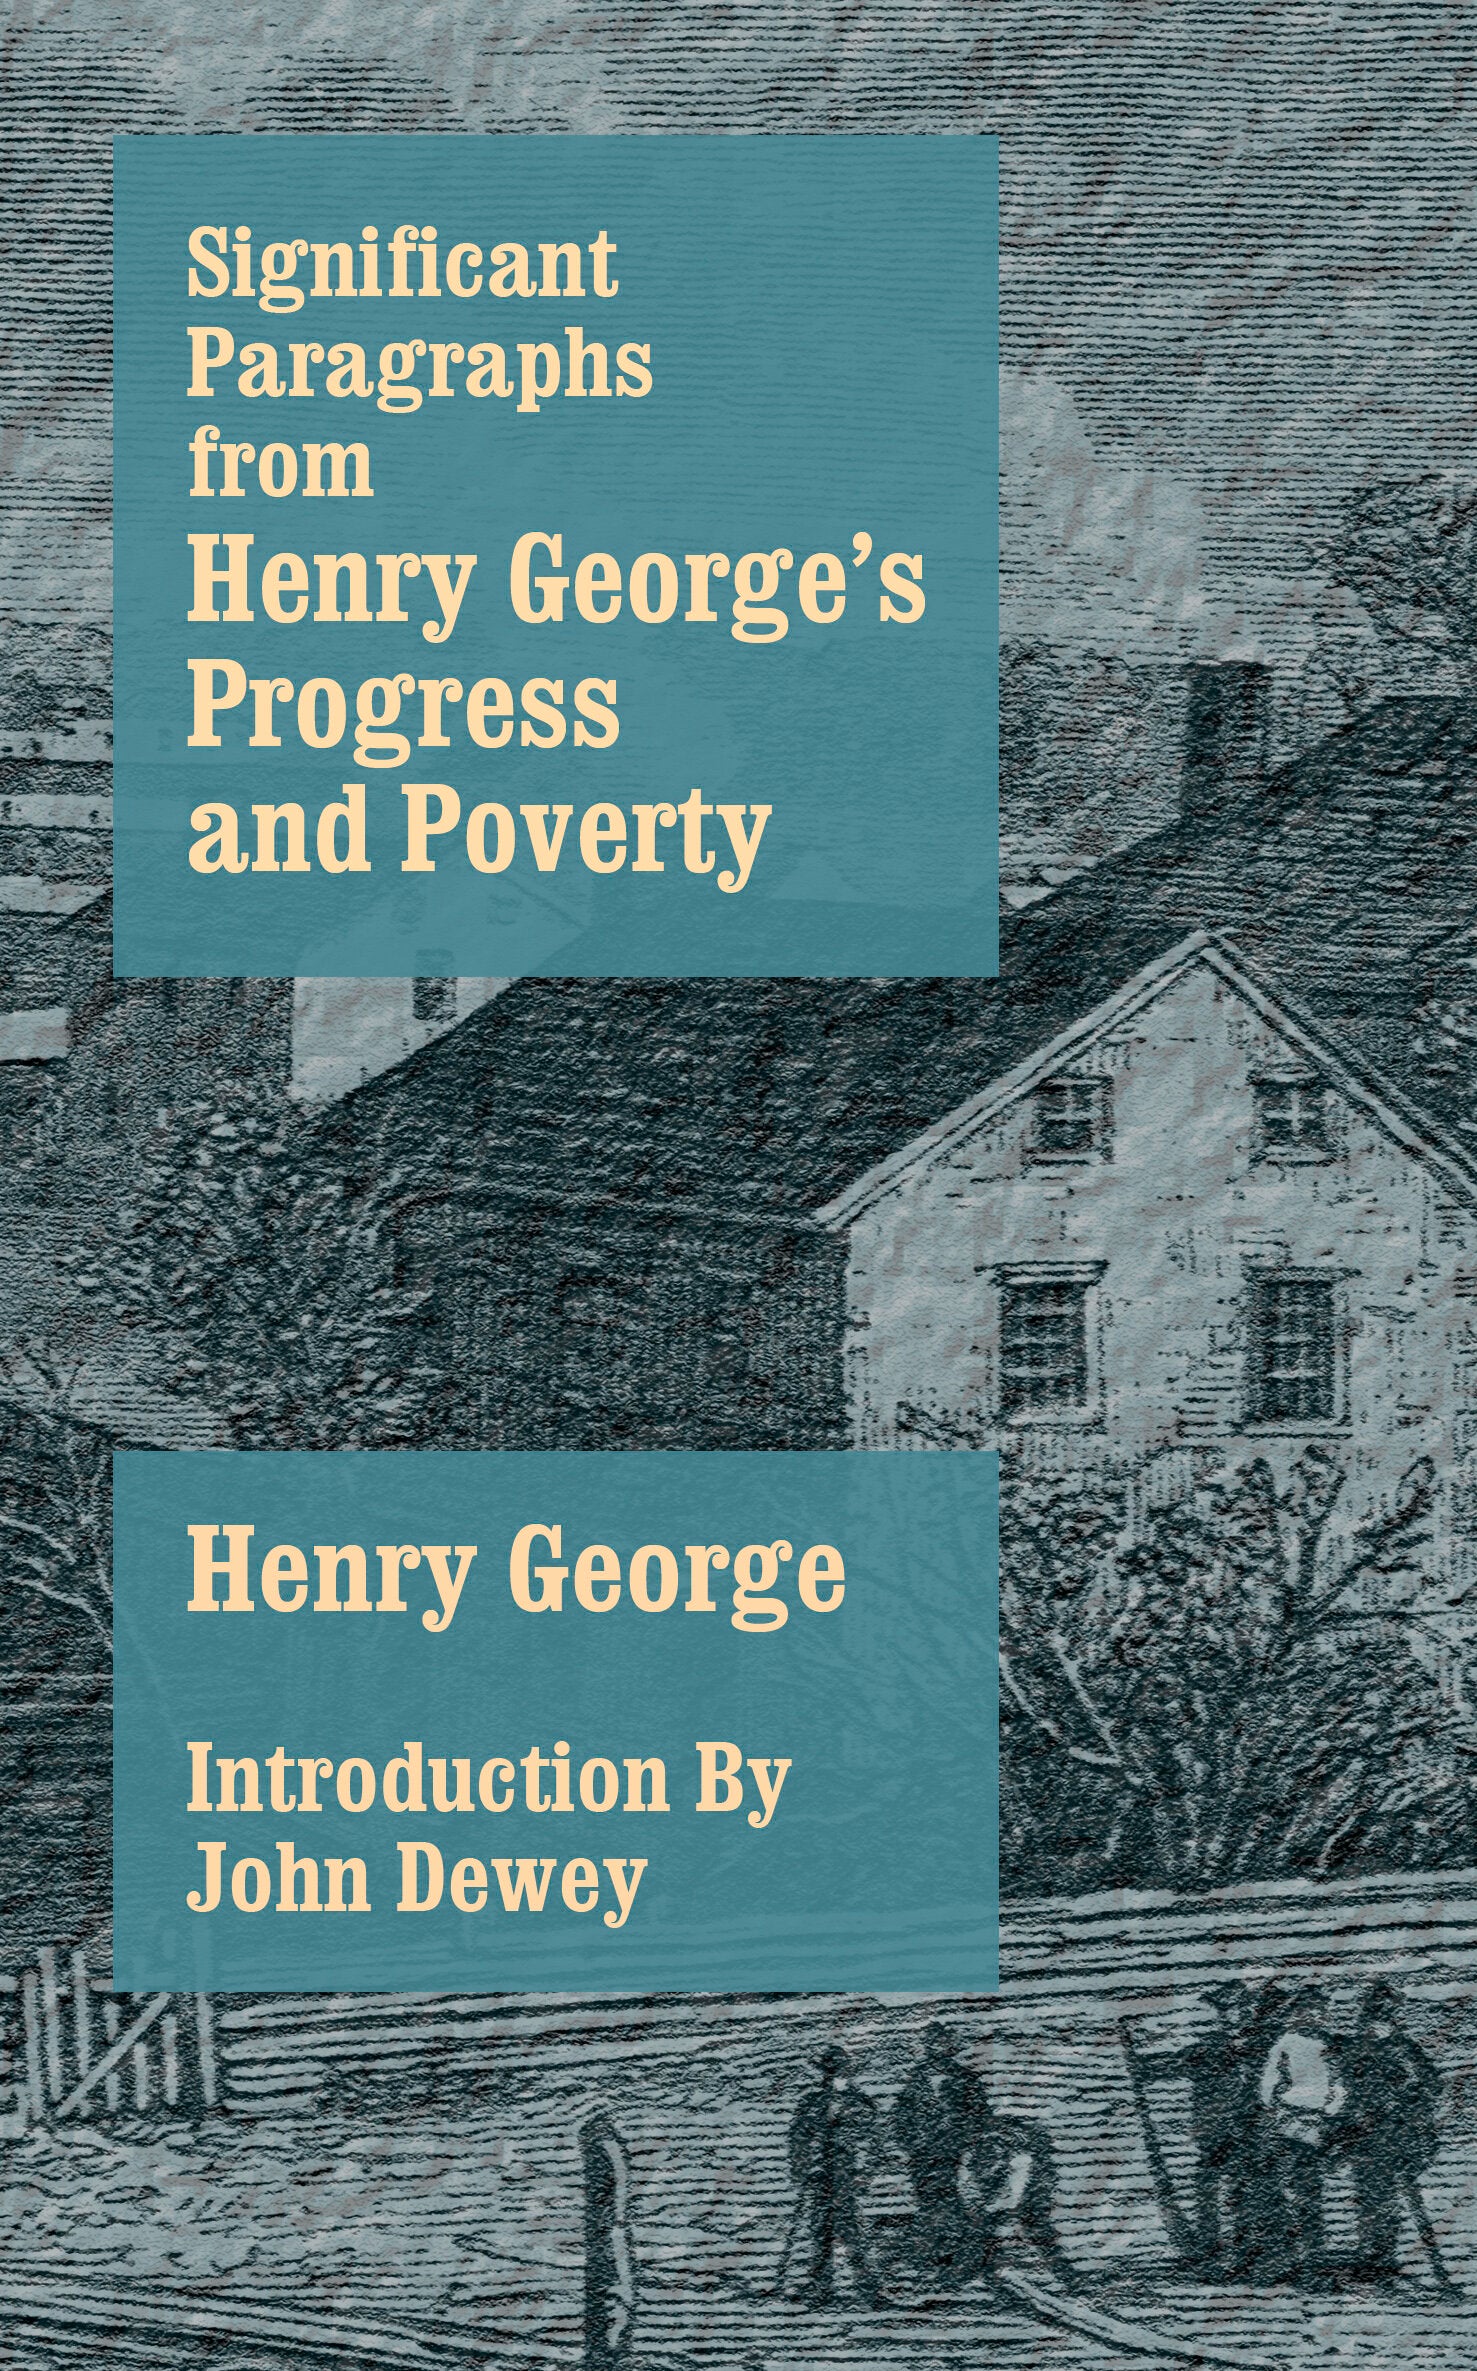 Significant Paragraphs from Henry George's Progress and Poverty